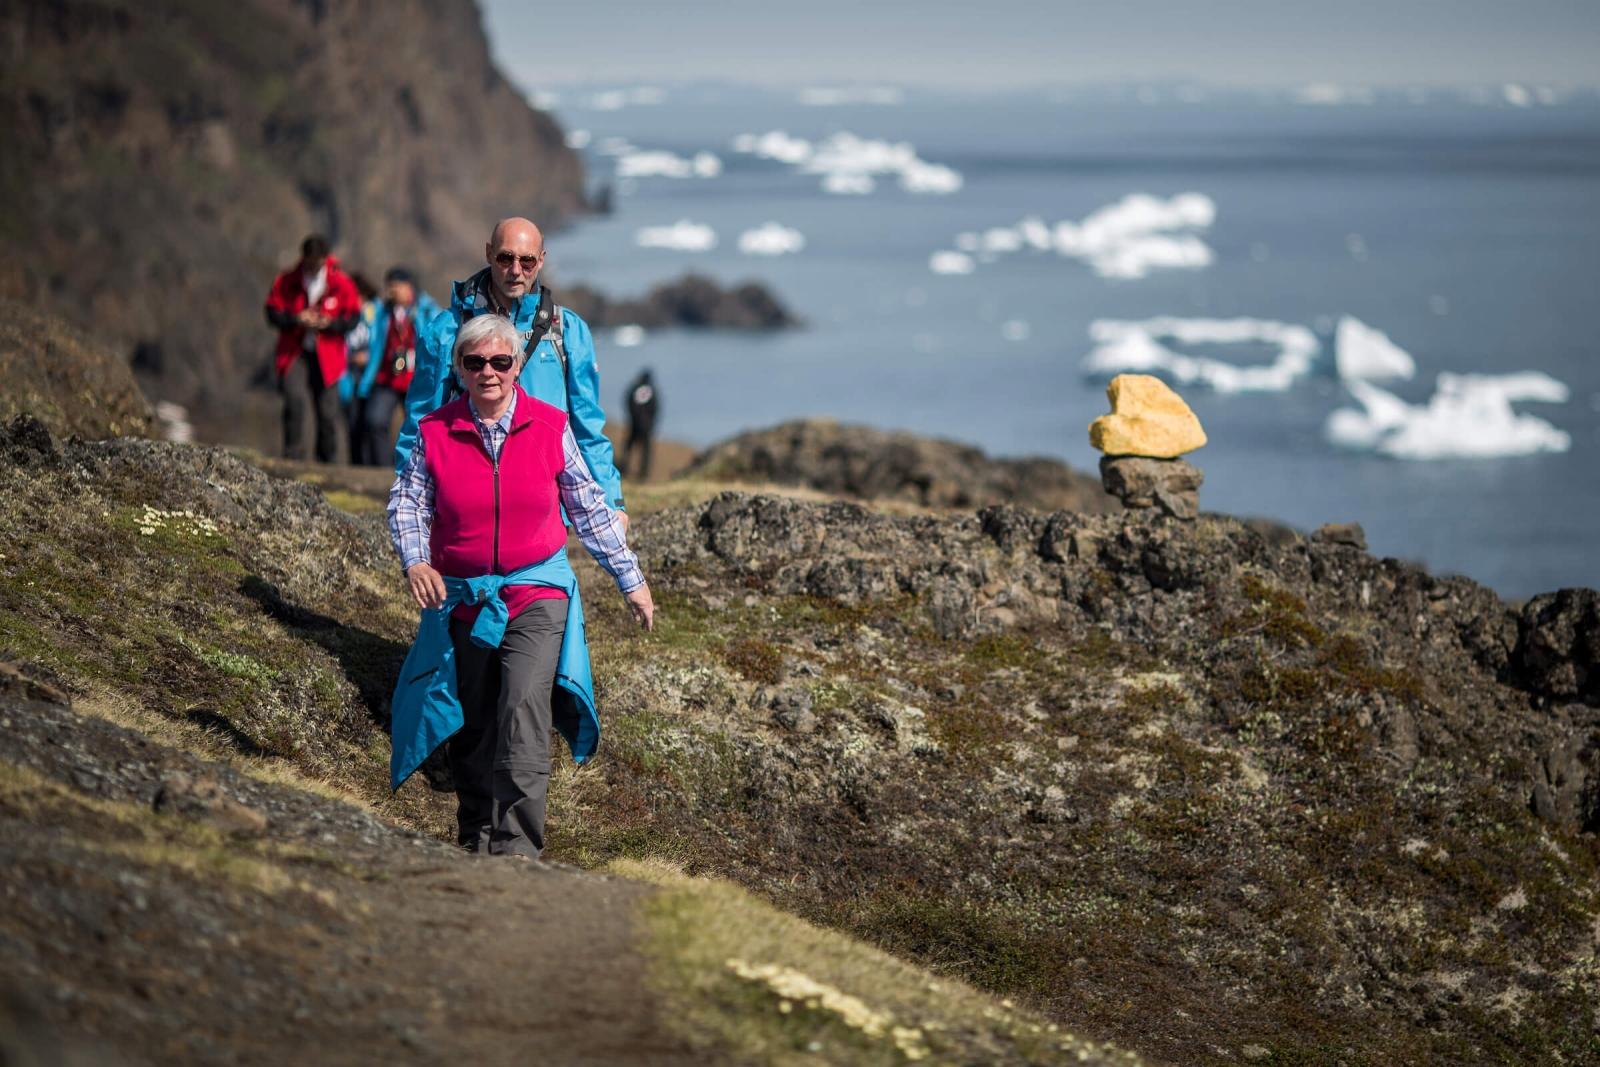 Cruise guests from MS Fram on a hike to the basaltic rocks in Qeqertarsuaq